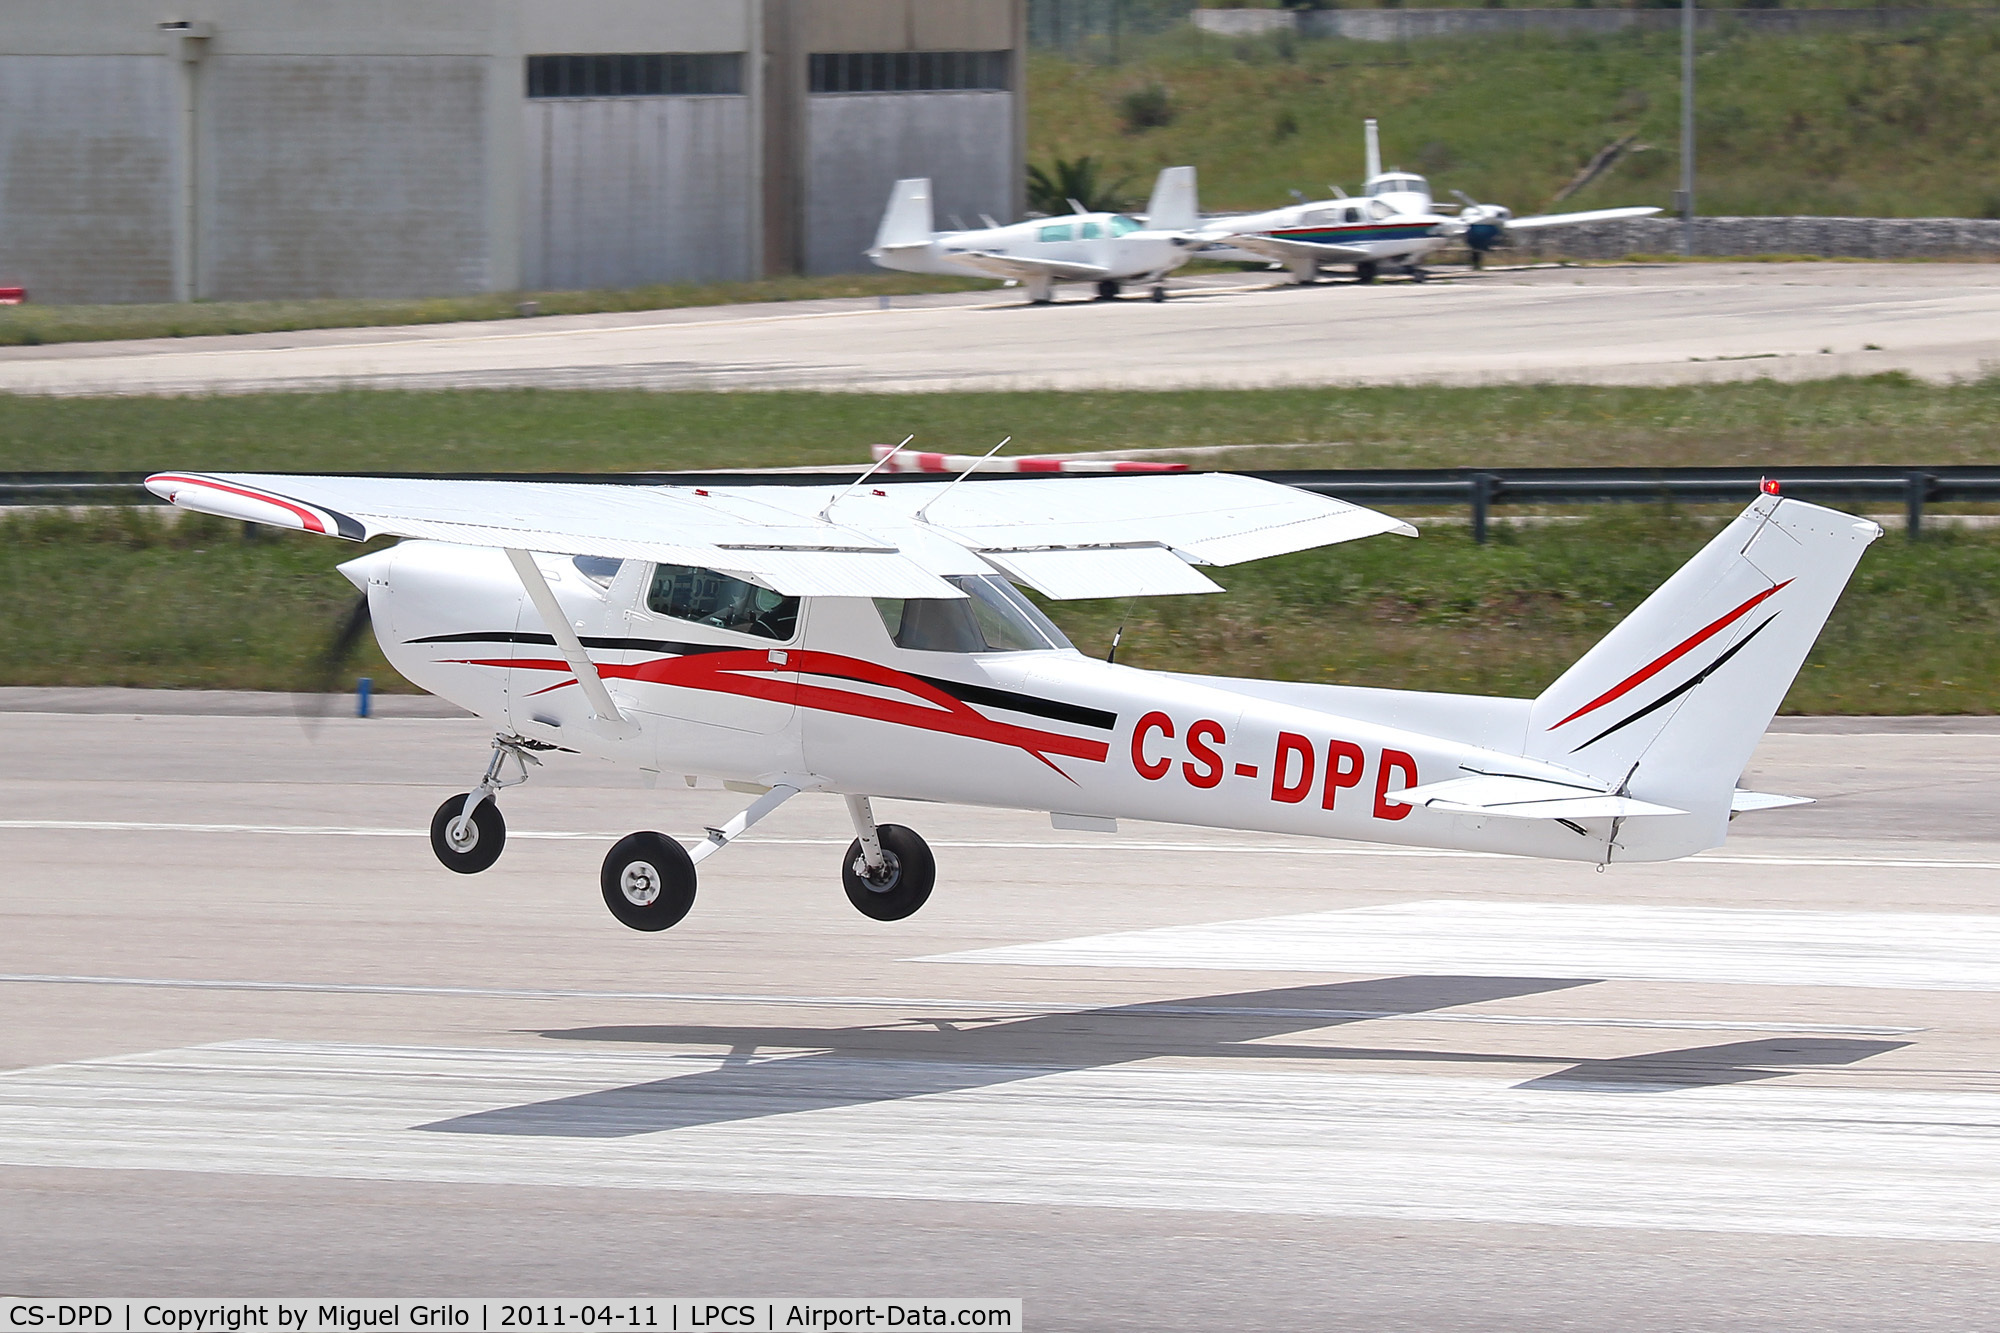 CS-DPD, 1978 Cessna 152 C/N 152-79563, CS-DPD Flaring at LPCS - Photo taken by Miguel Grilo